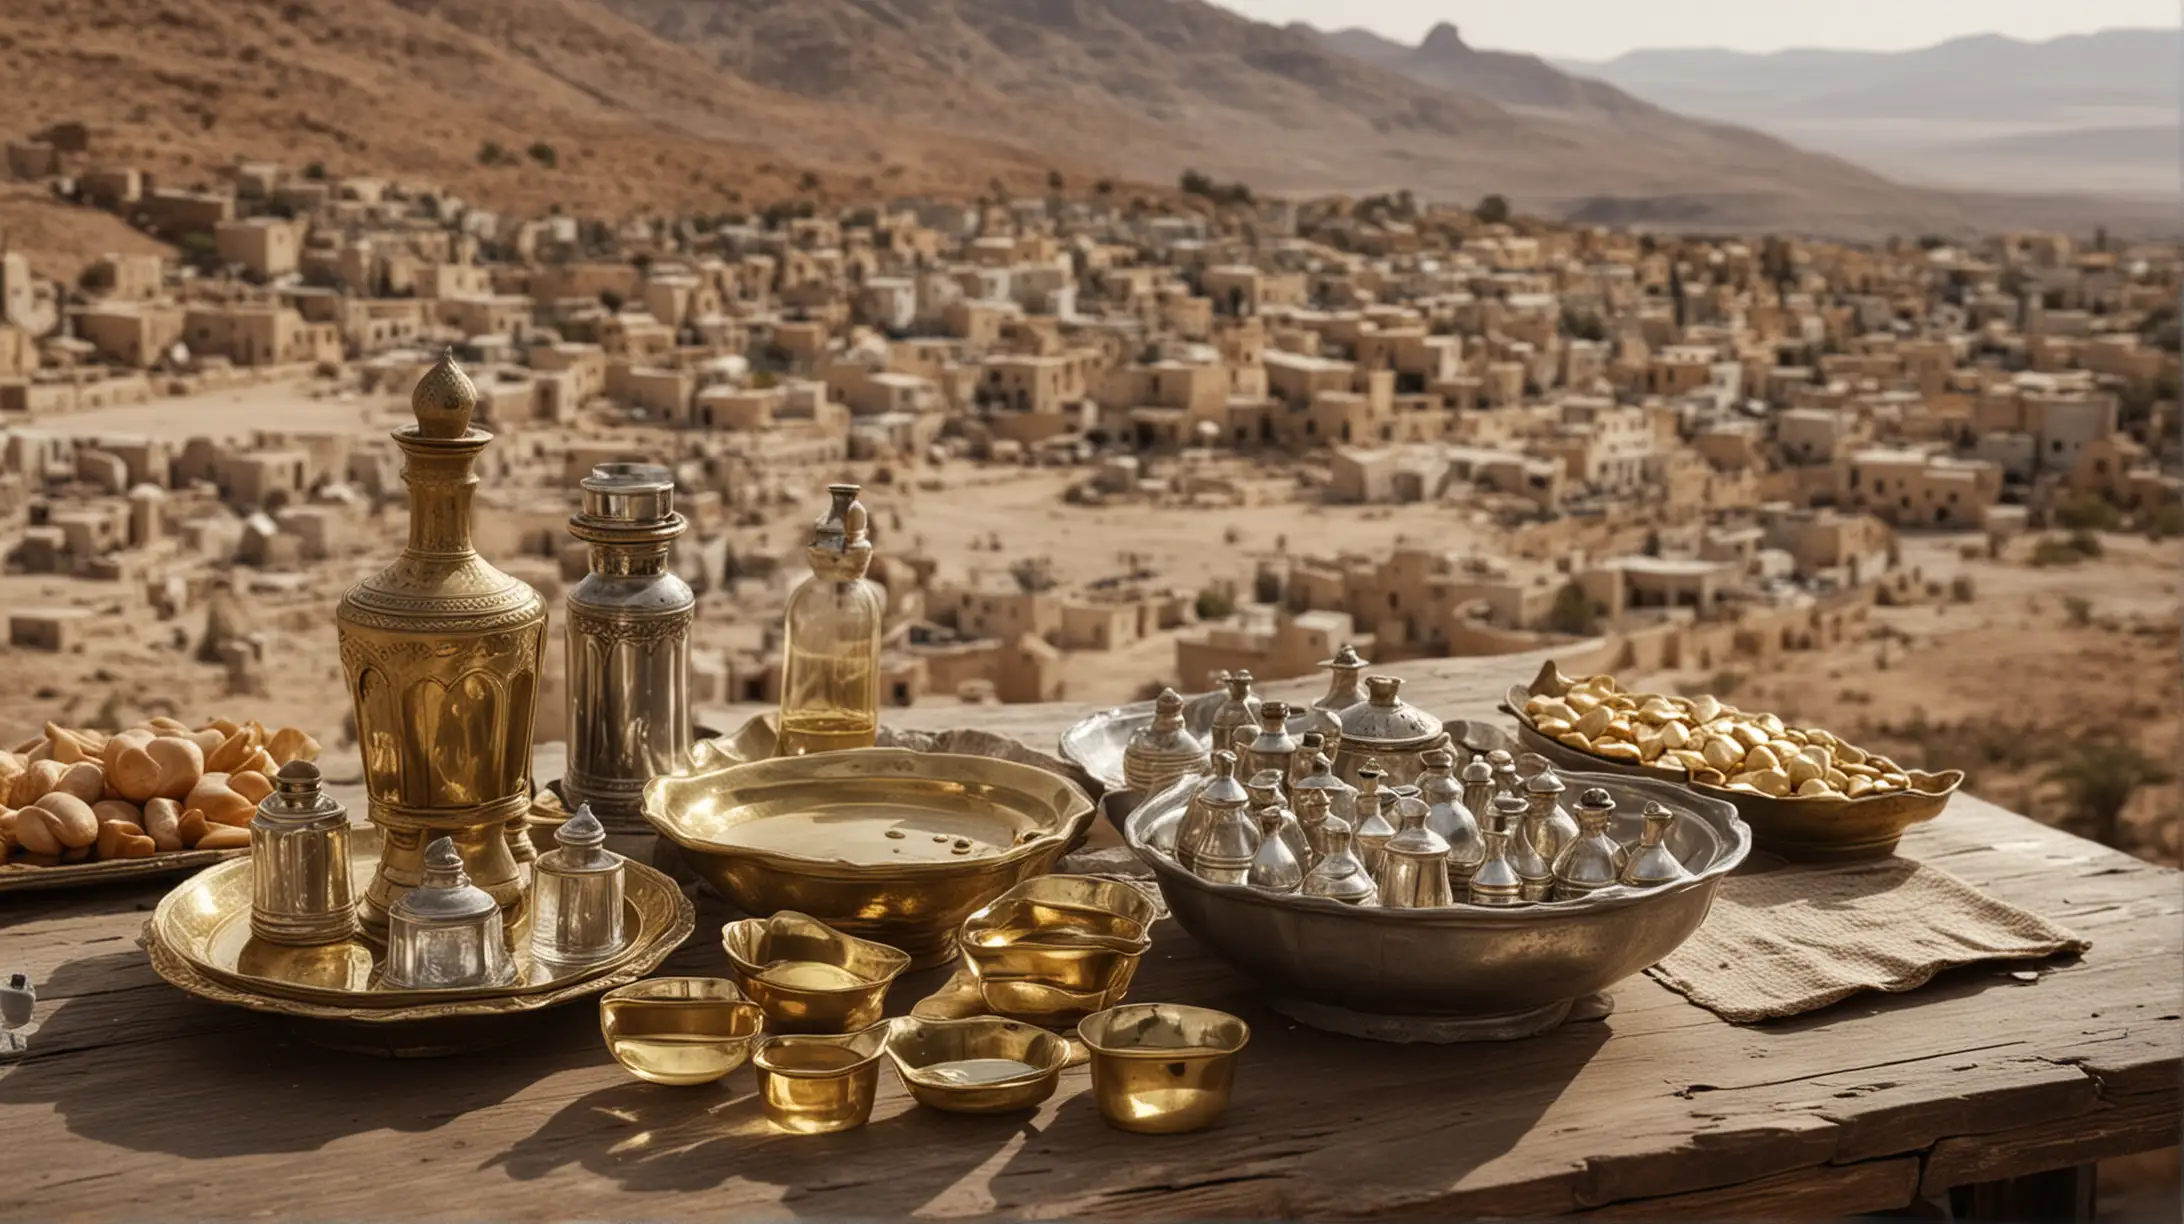 a close up of an old table, with some Gold and silver bowls on it, and some annointing oil set in a small desert  village scene, with some jewish people in the distance,  Set during the Era of the Biblical Moses.